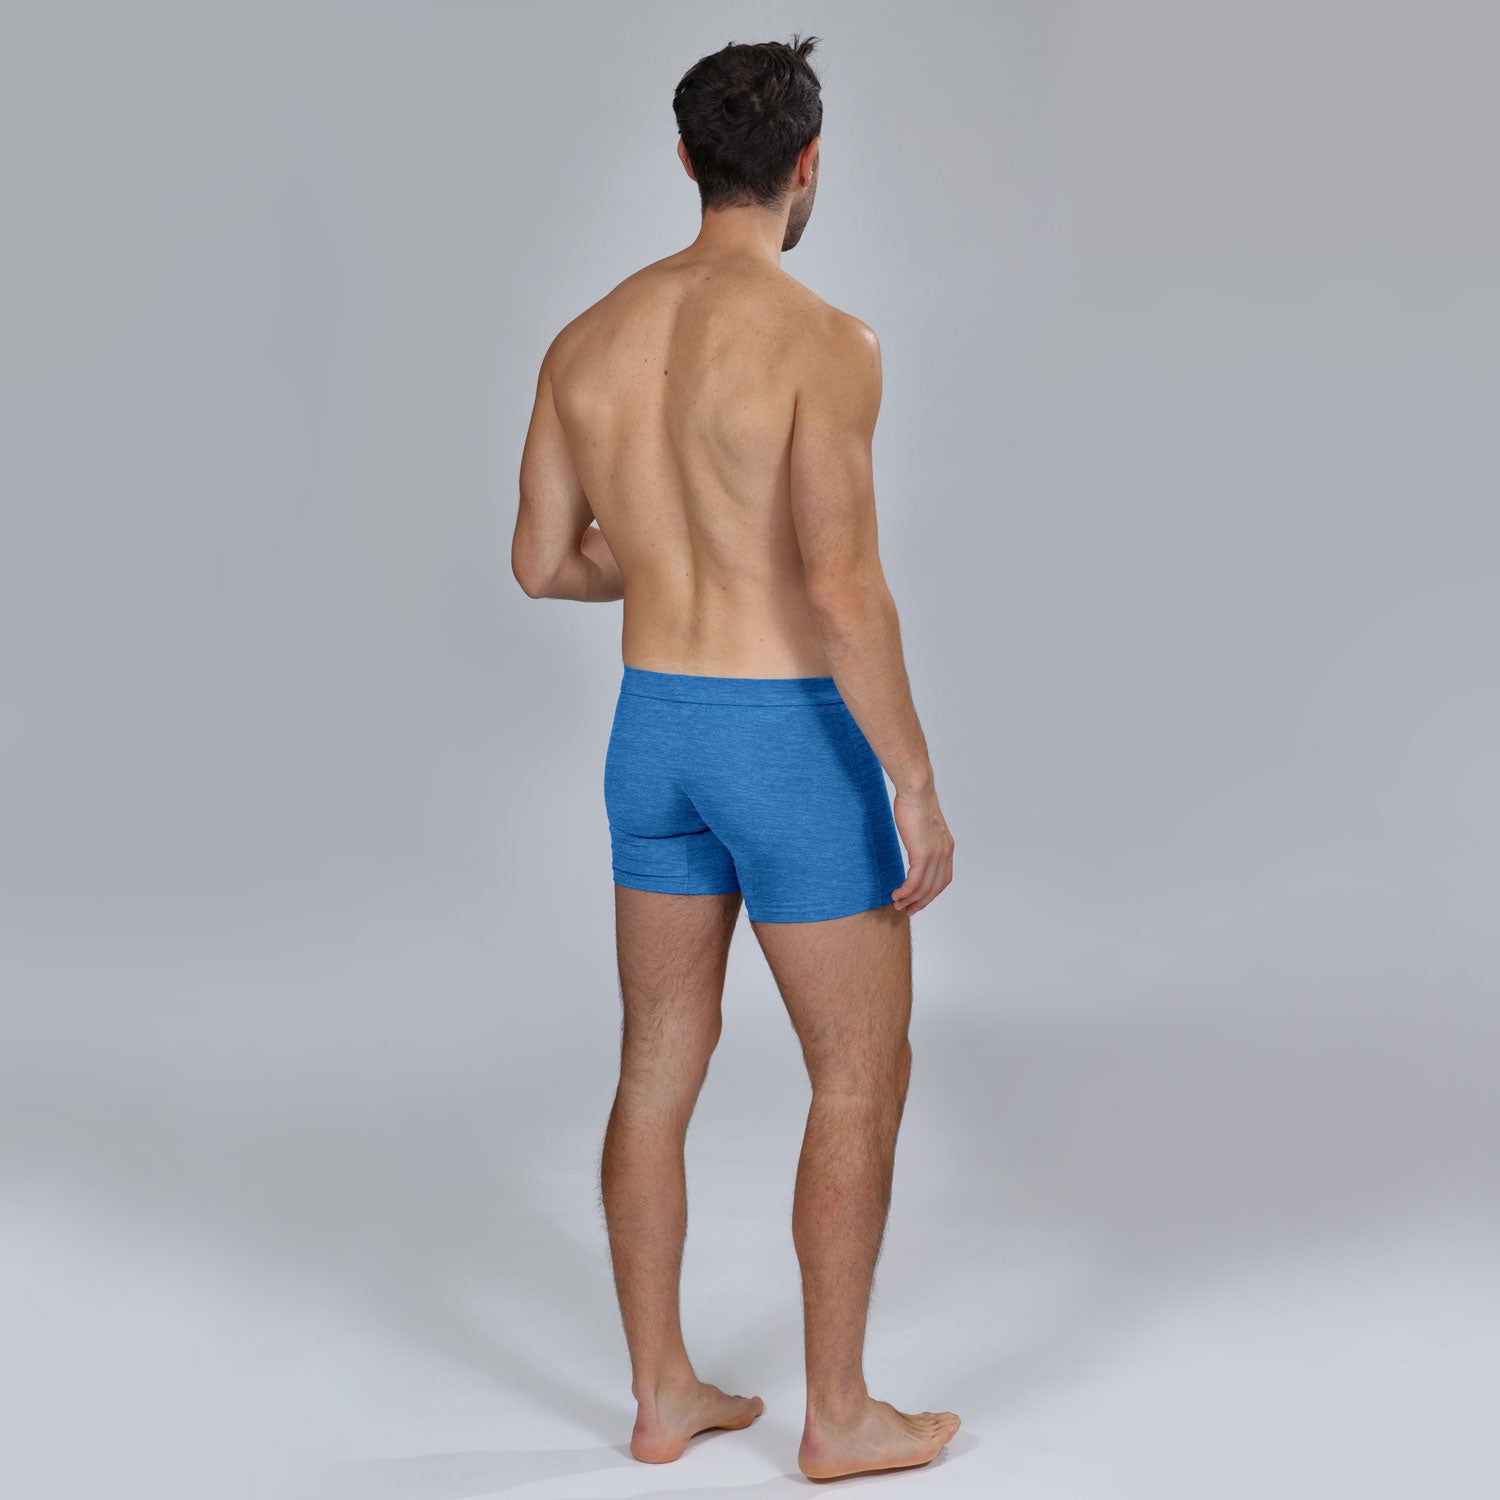 The Limited Edition Laptis Blue Boxer Brief for men in the USA and Canada